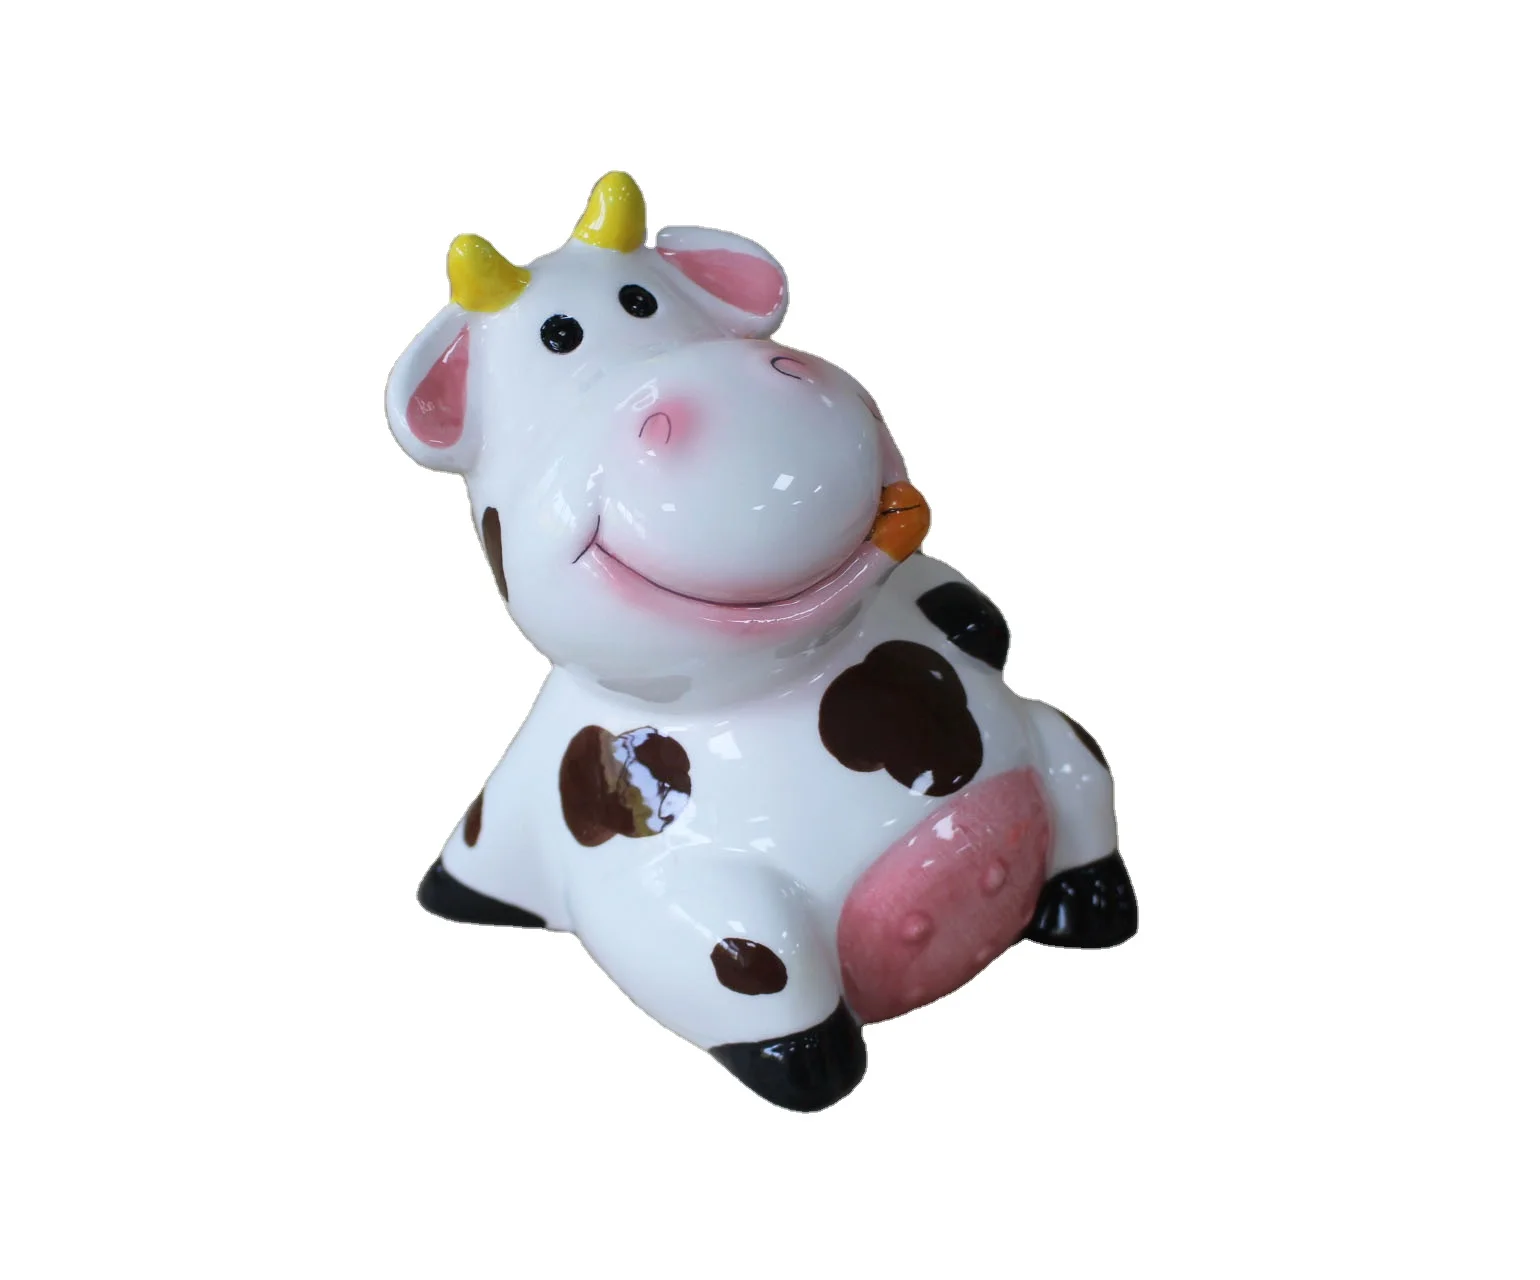 Red YSMYWM Cute Cow Ceramic Piggy Bank Personalized Money Saving Bank for Kids Gift